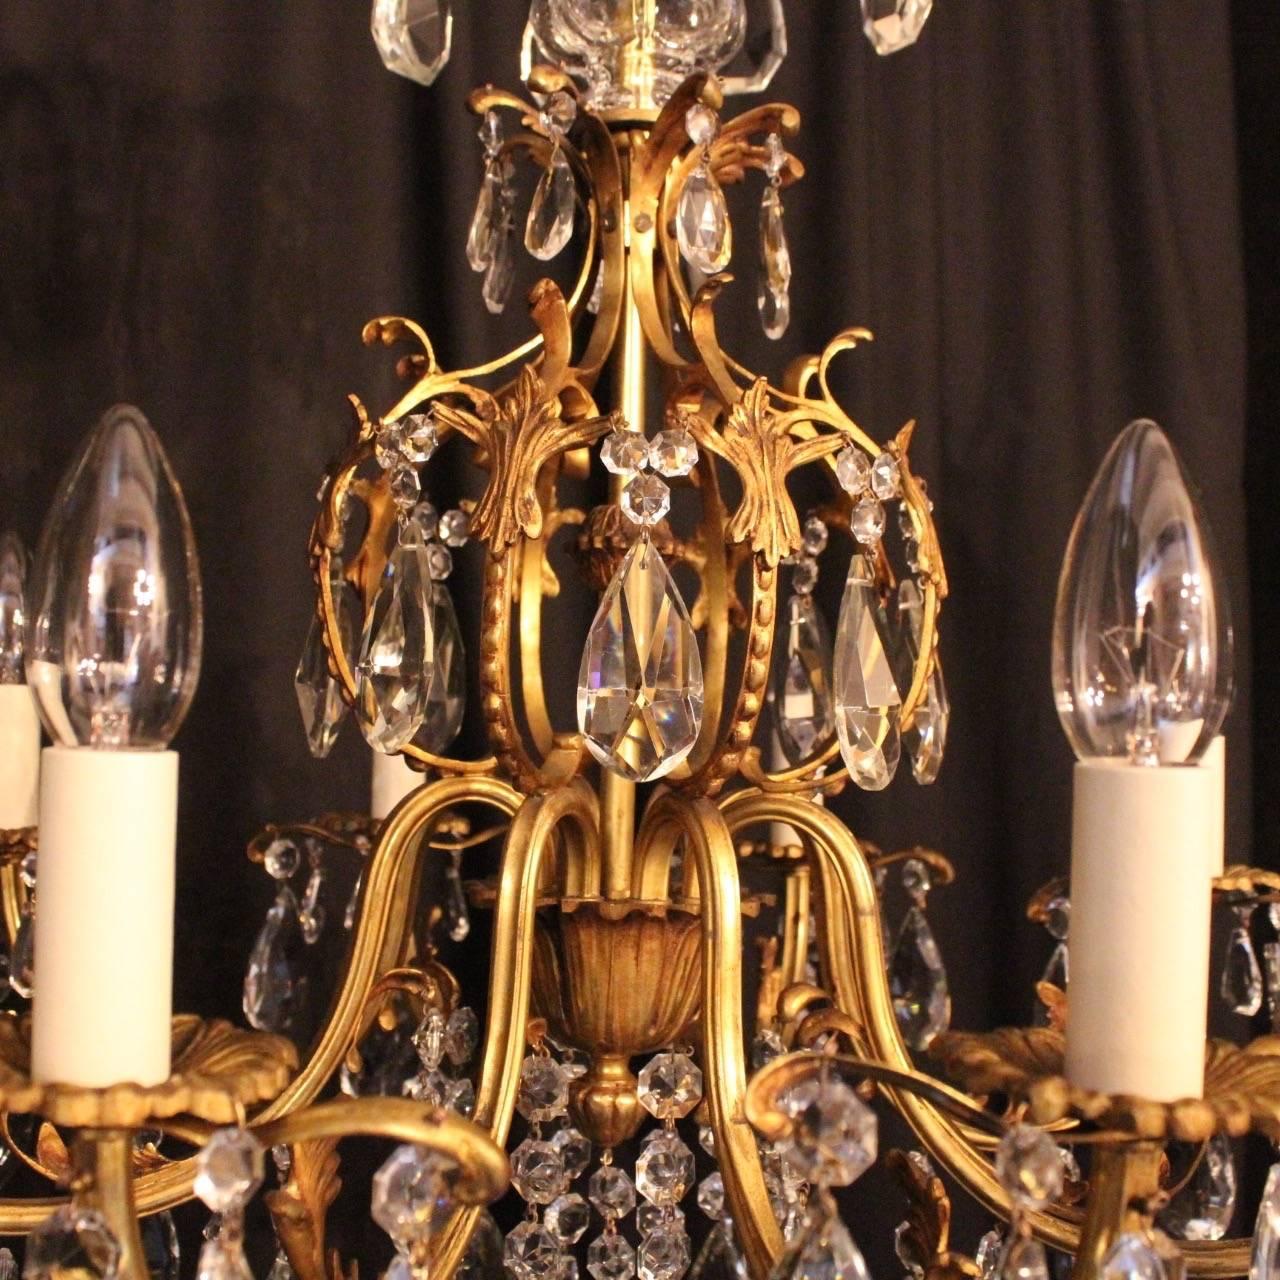 An Italian gilded bronze and crystal eight-light antique chandelier, the acanthus leaf clad scrolling arms with sectional leaf bobeche drip pans, issuing from a central open cage form interior with glass baluster column top and Acanthus leaf